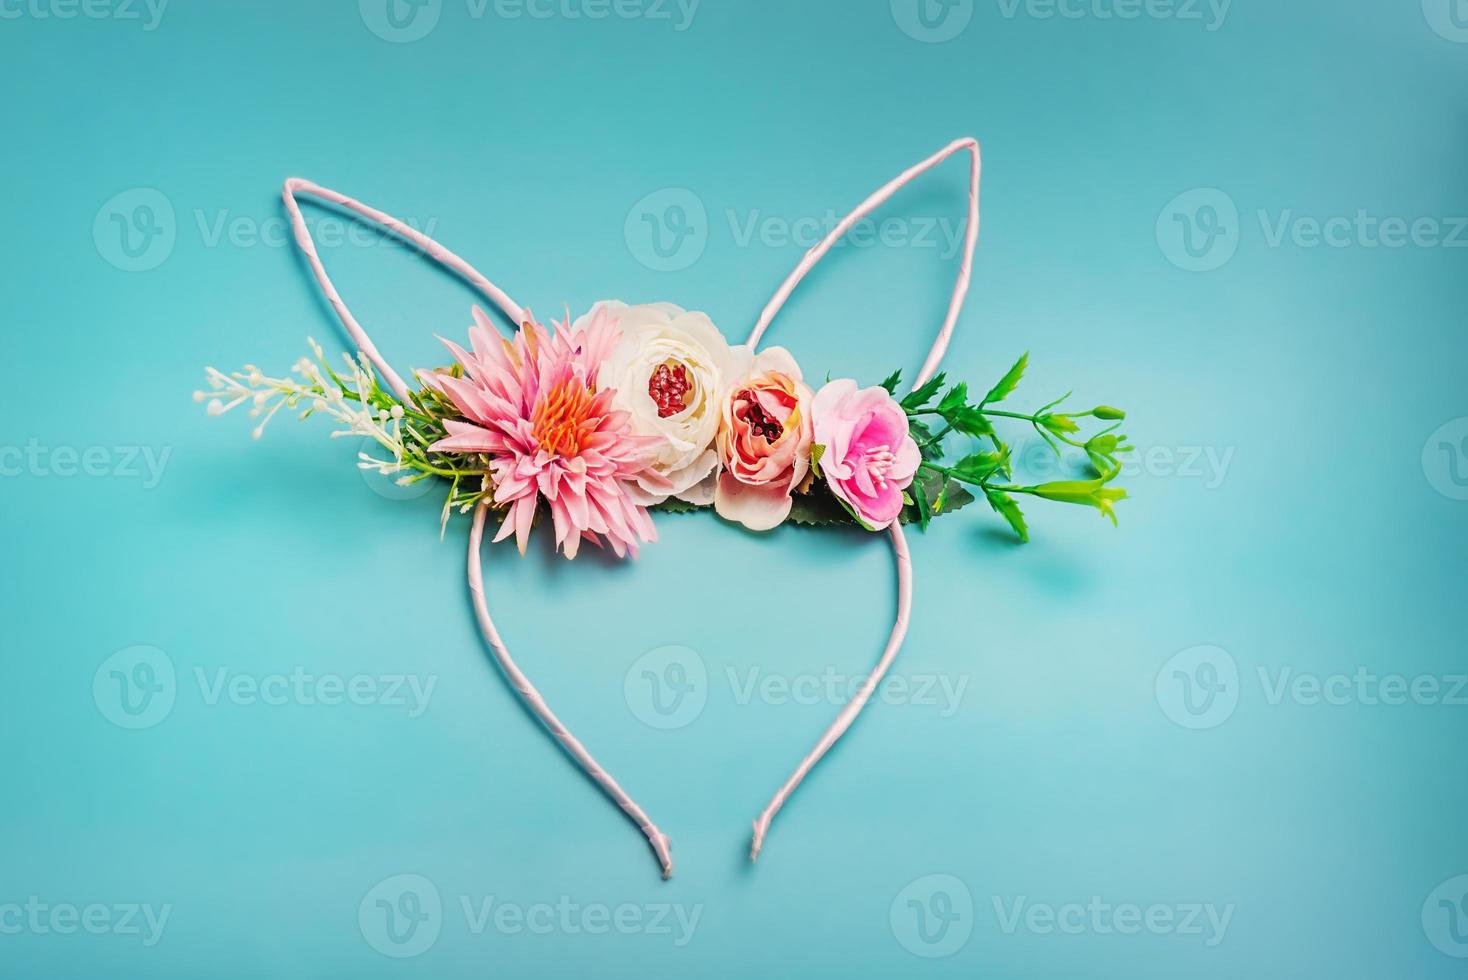 Rabbit ears as a hair decoration on Easter day. Decor, ornament for the Easter holiday. photo